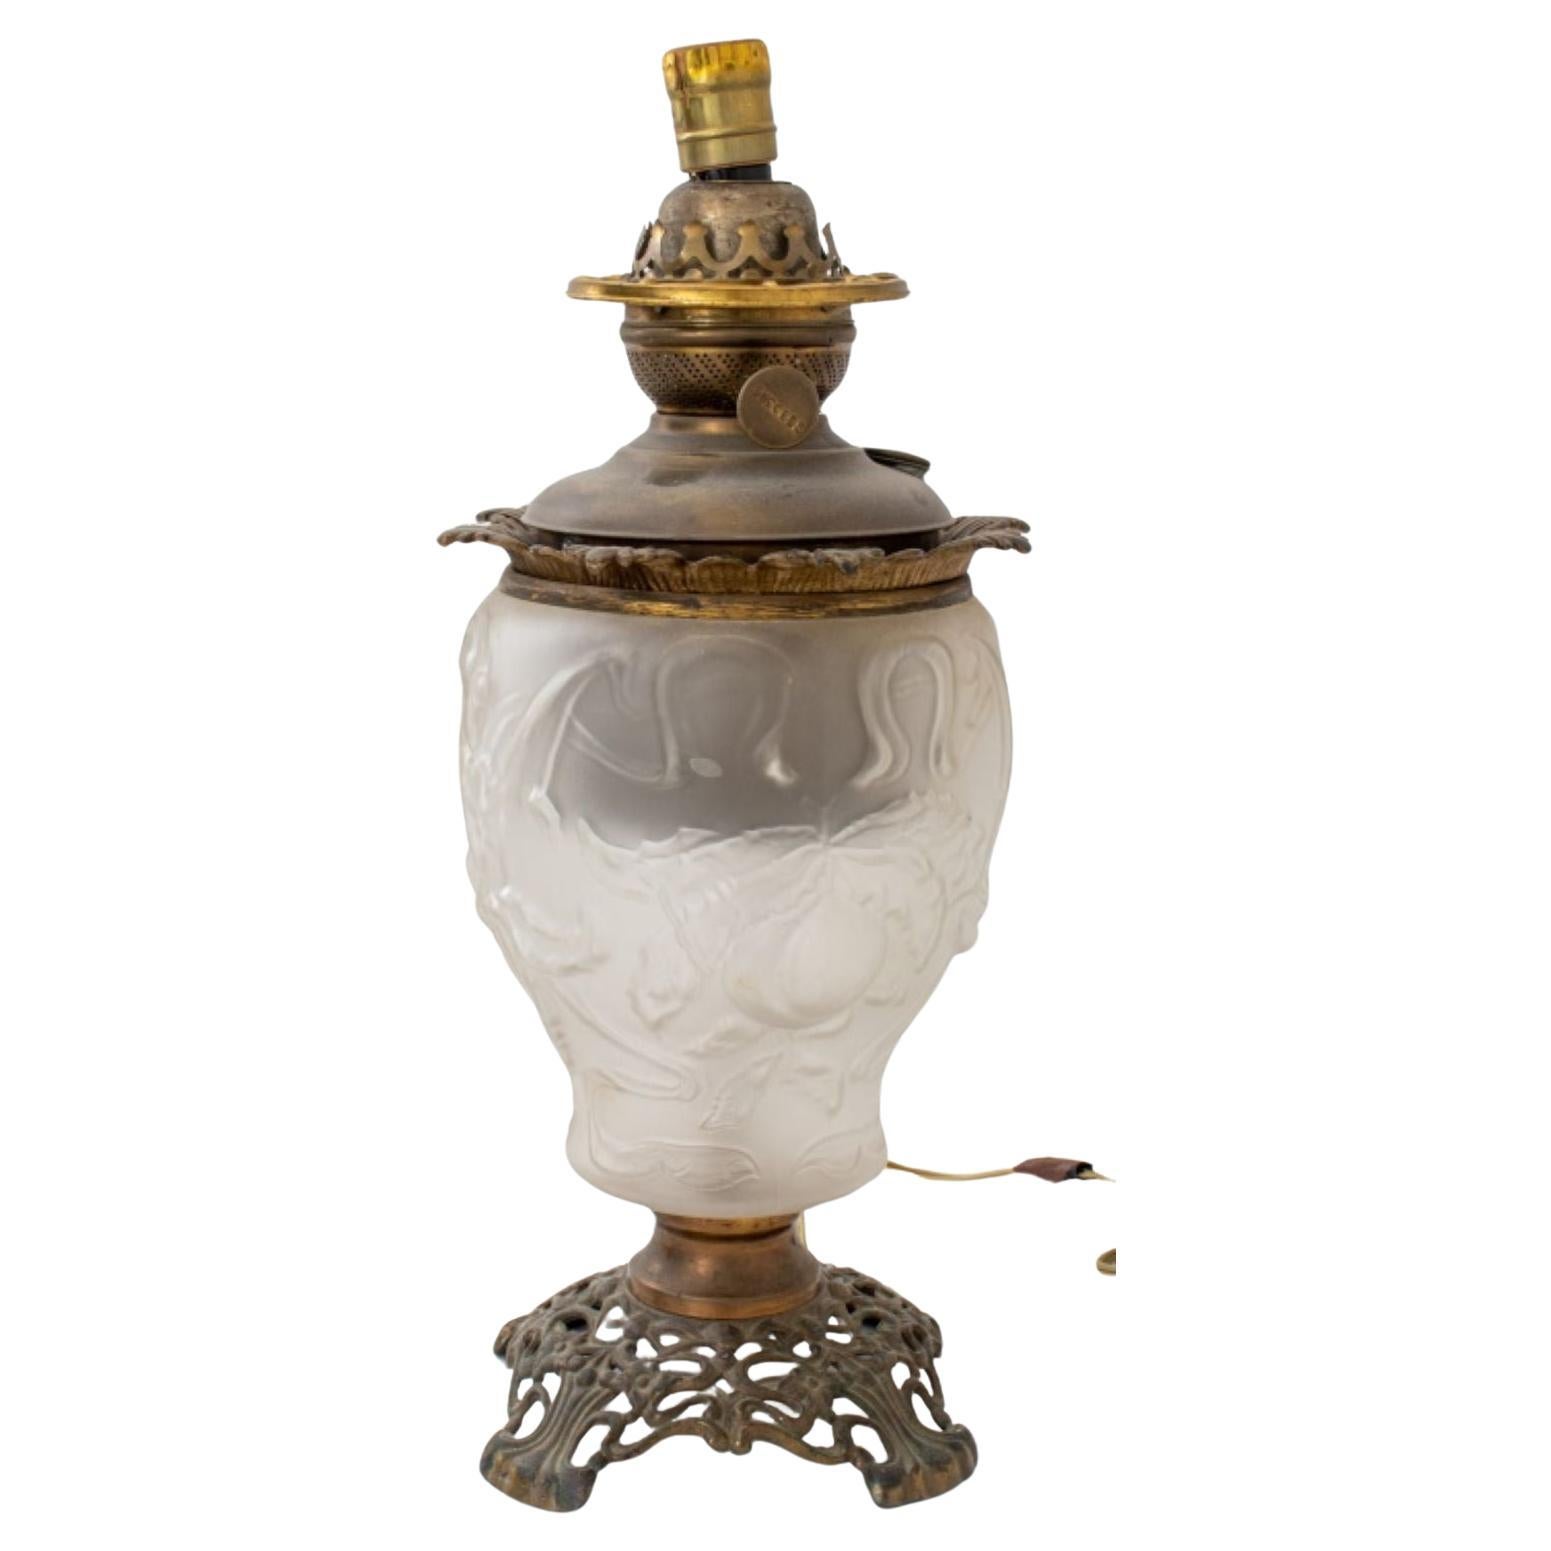 Are oil lamps still used?